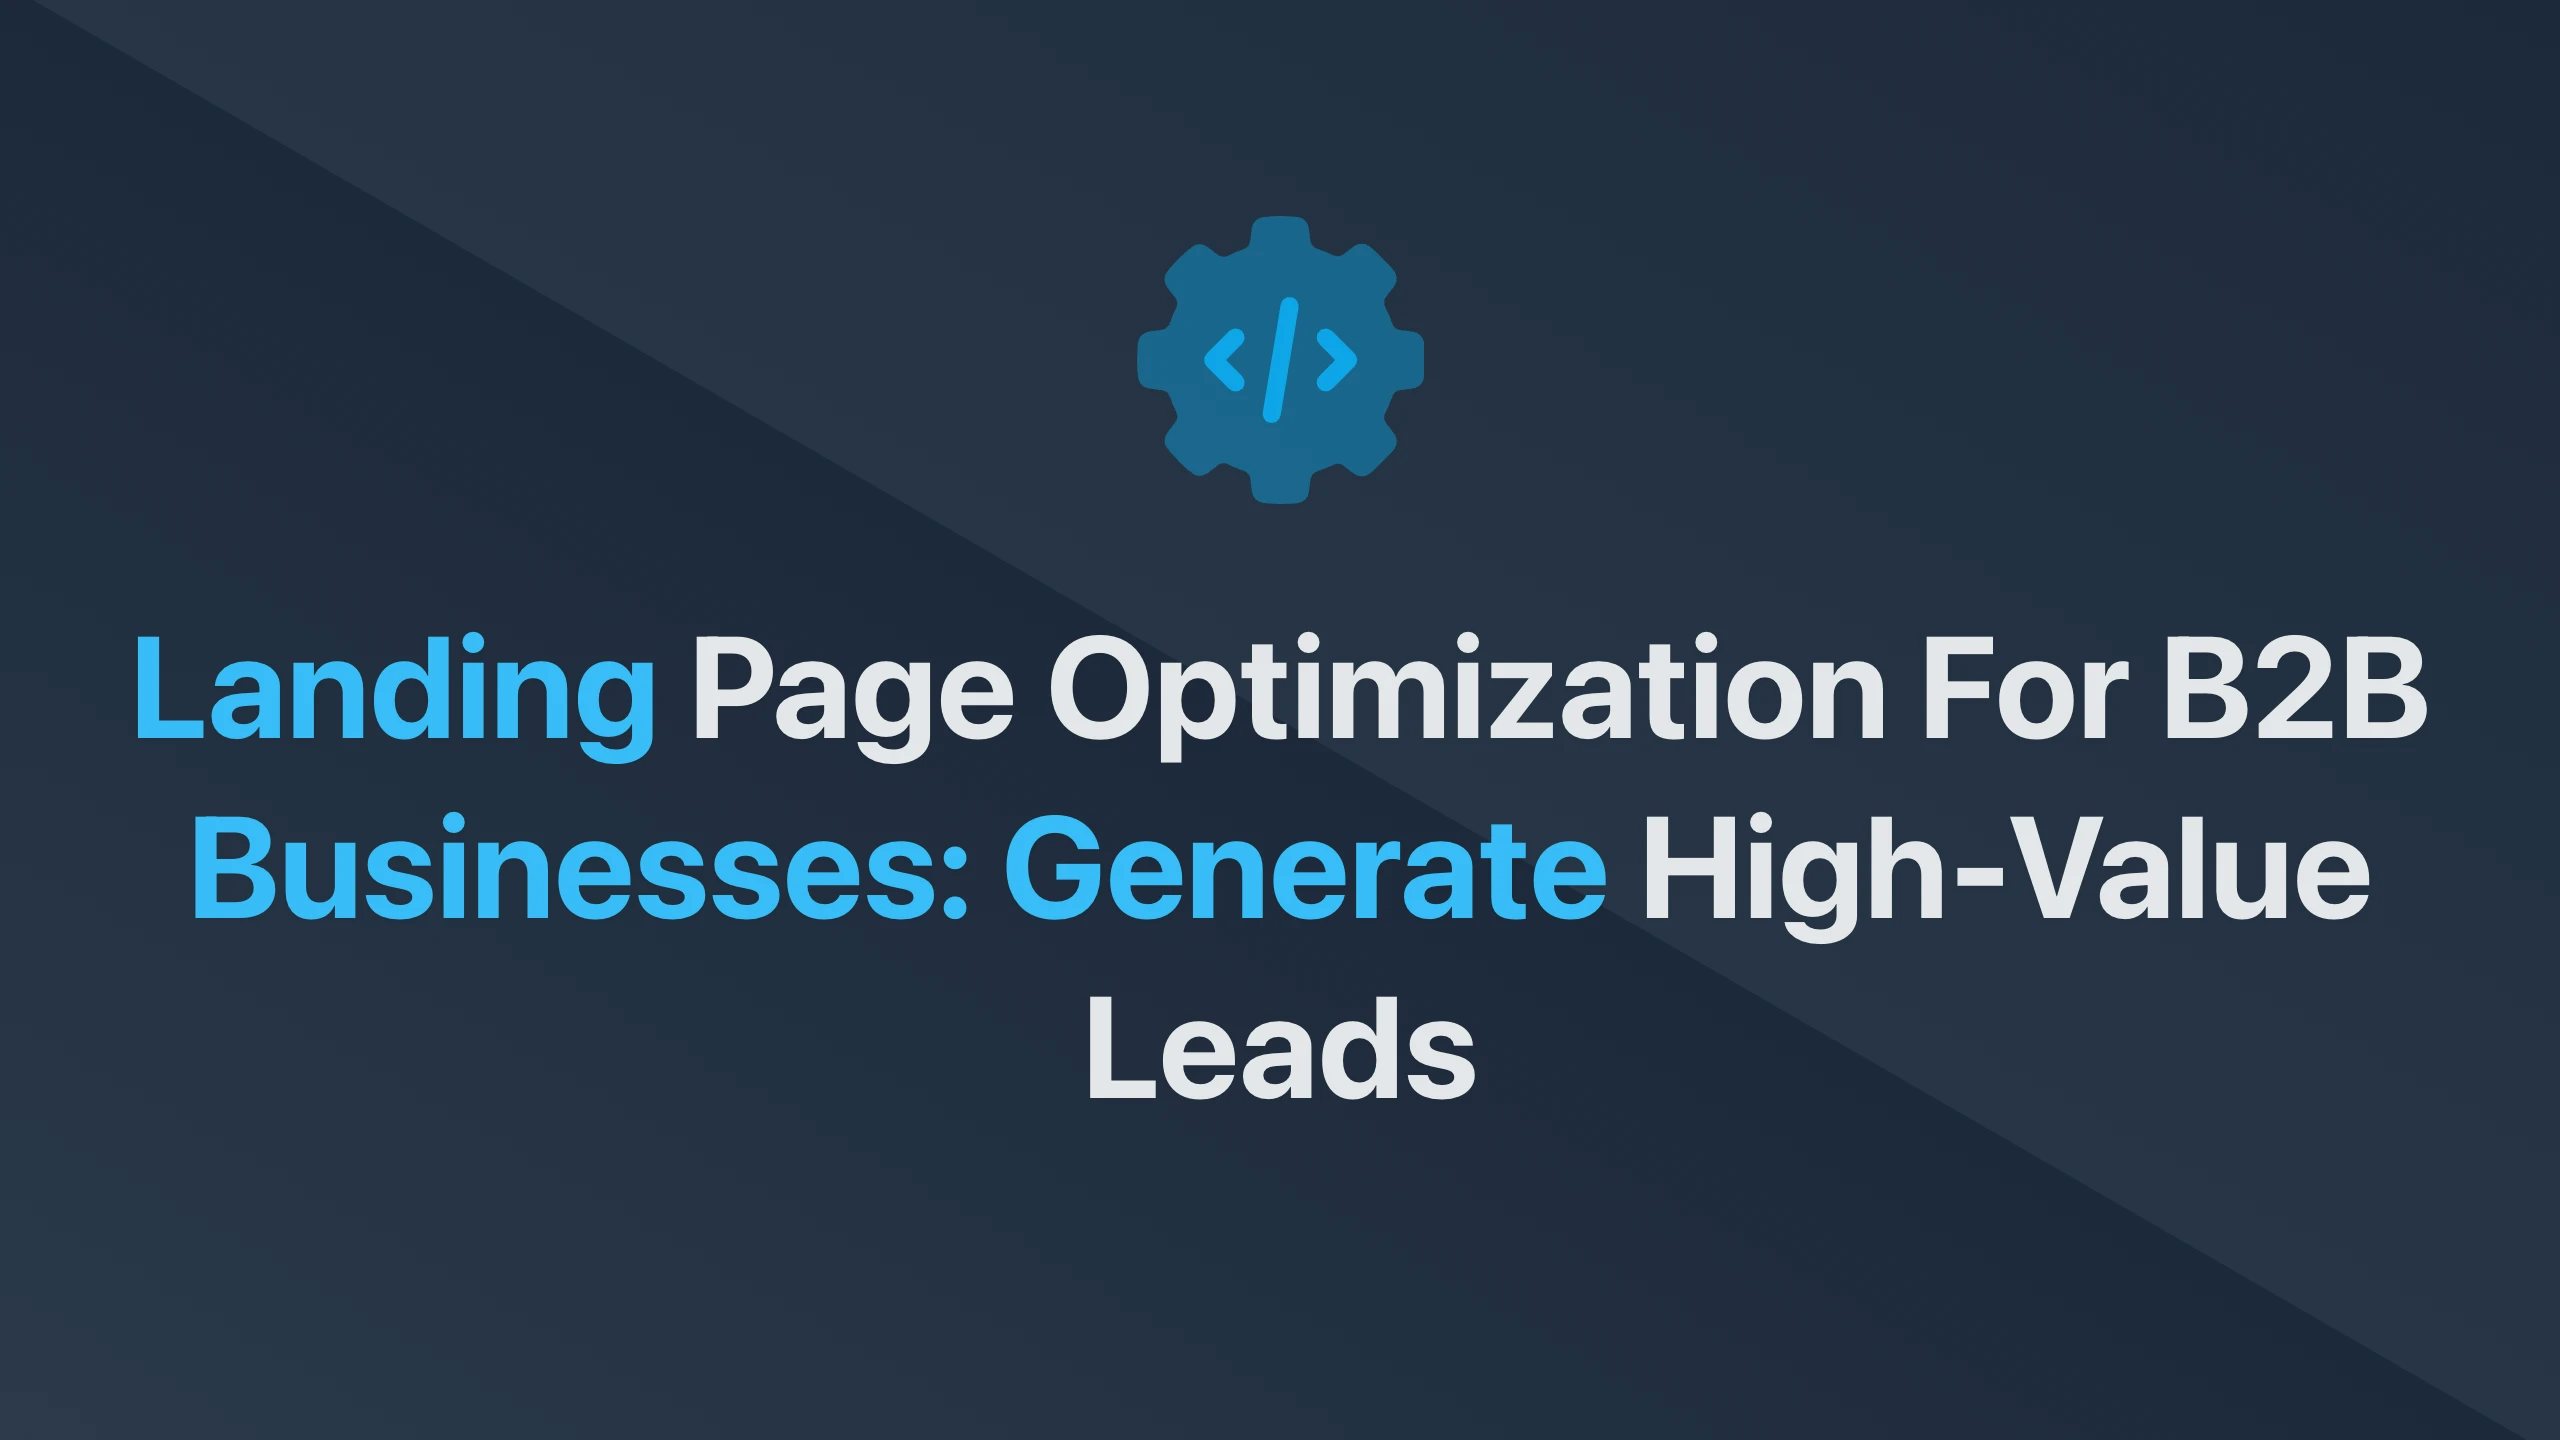 Cover Image for Landing Page Optimization for B2B Businesses: Generate High-Value Leads